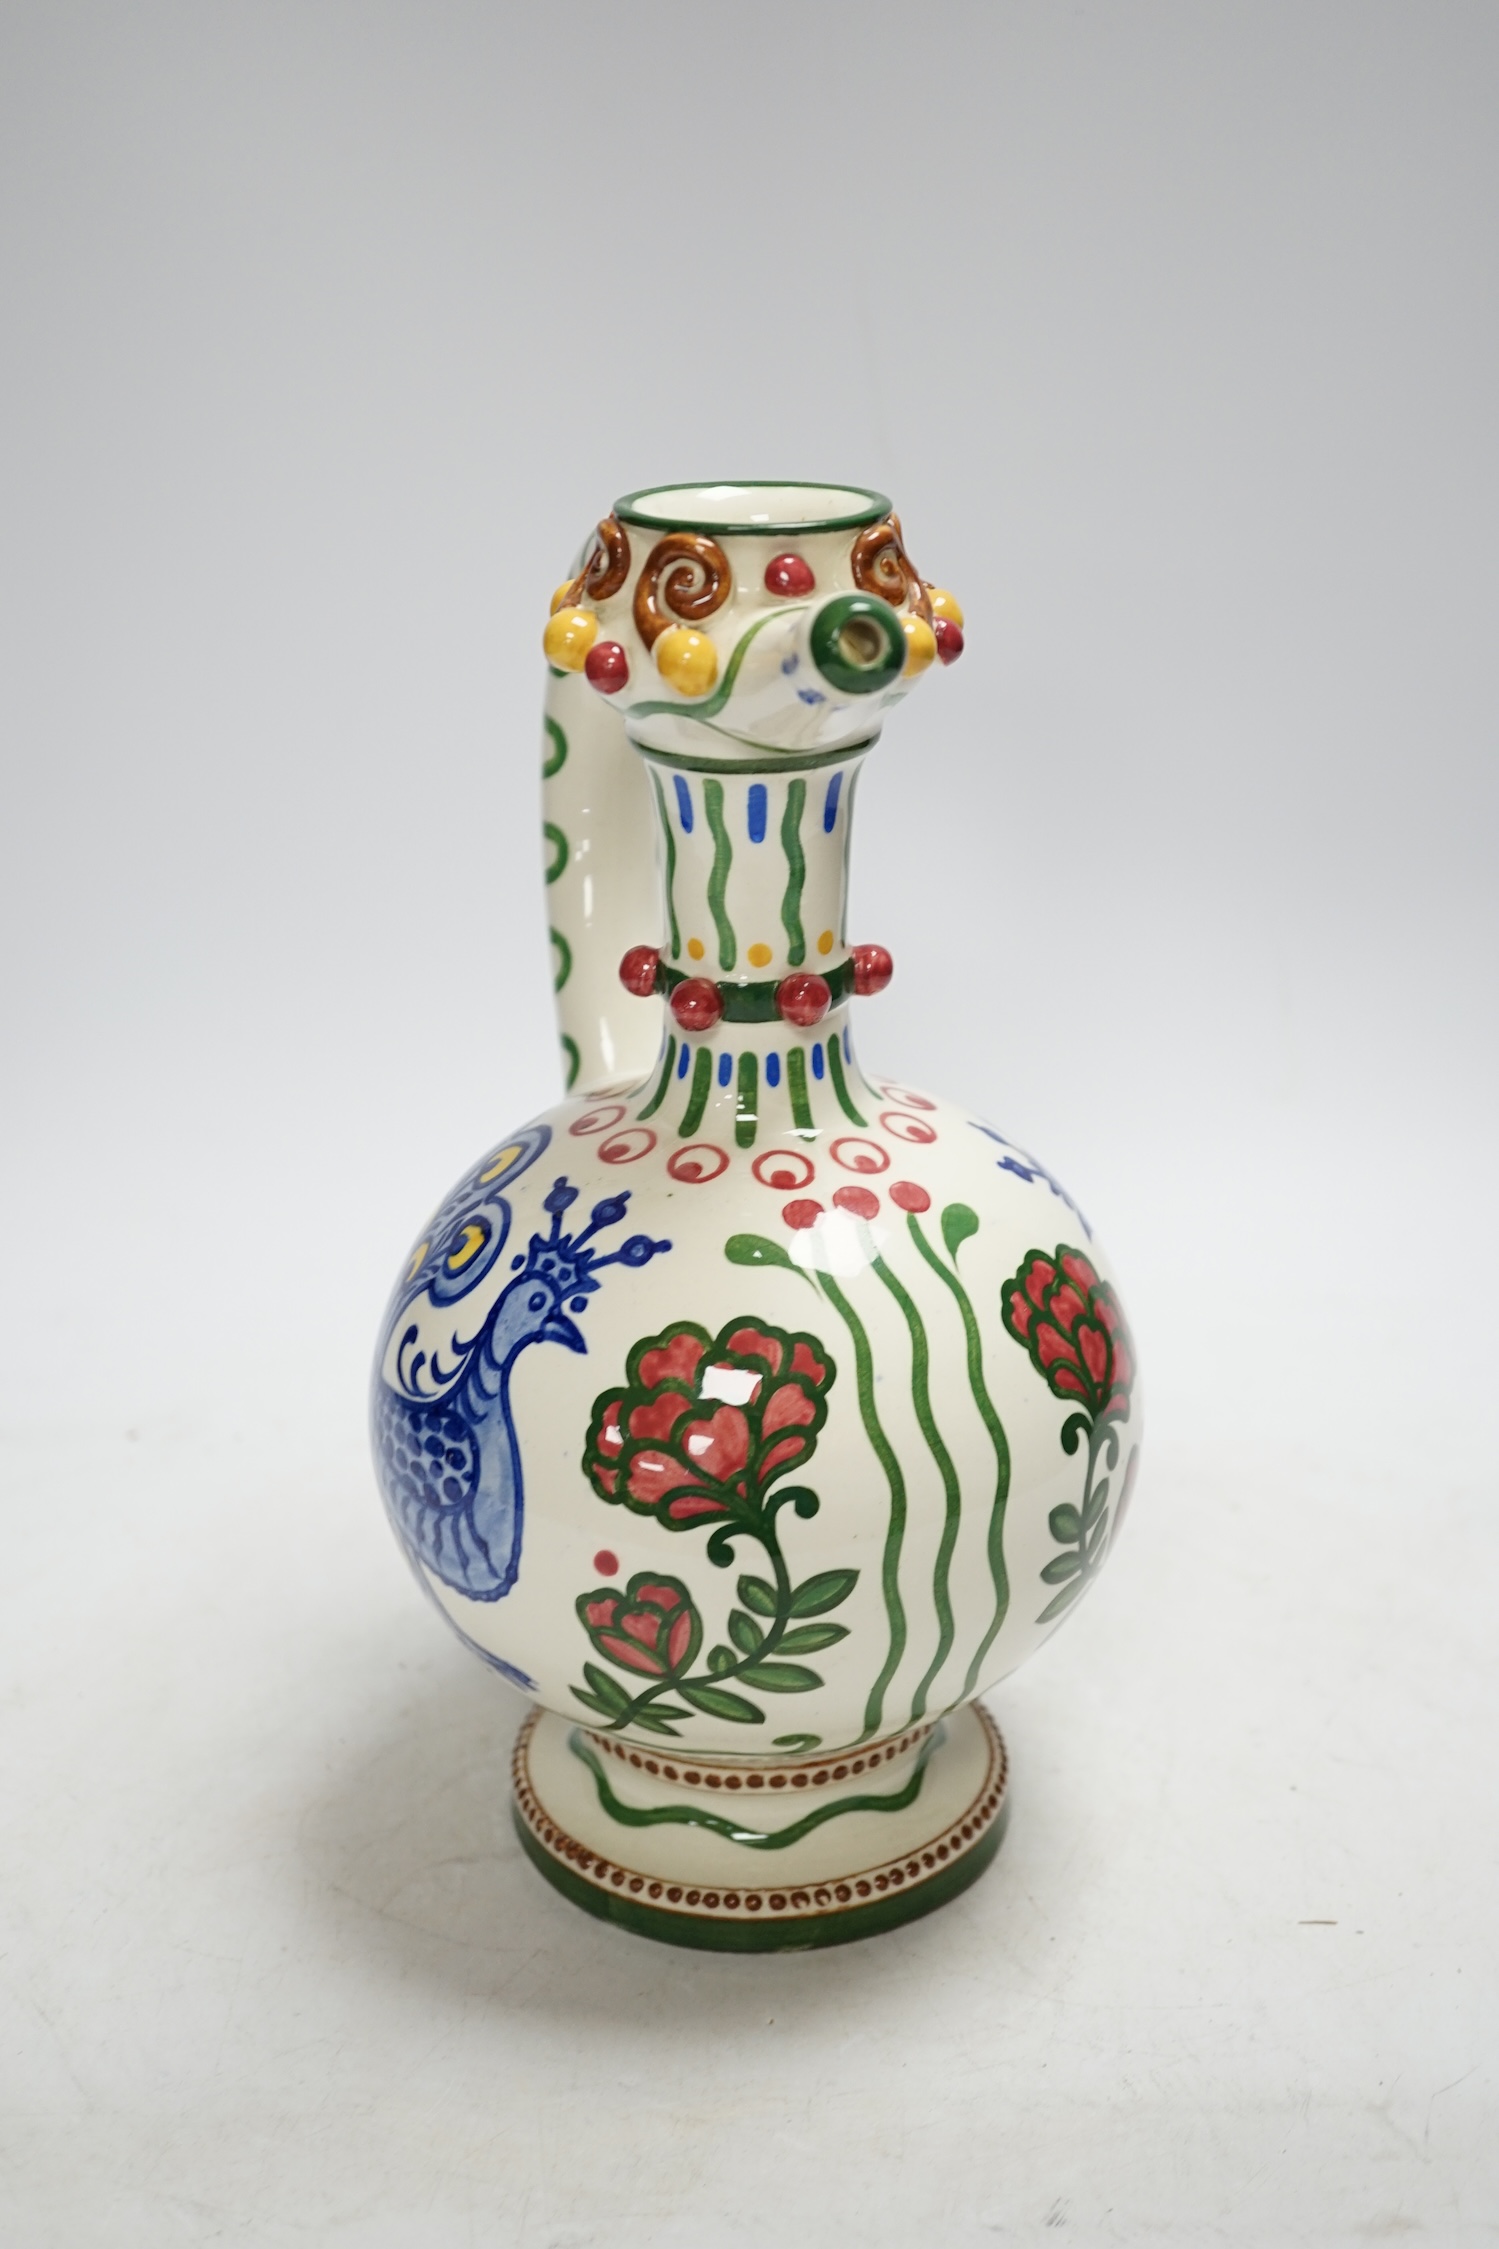 A Zsolnay jug or ewer decorated with peacocks and flowers, stamped ‘Zsolnay 830 and 07’ to the base, - Image 2 of 4